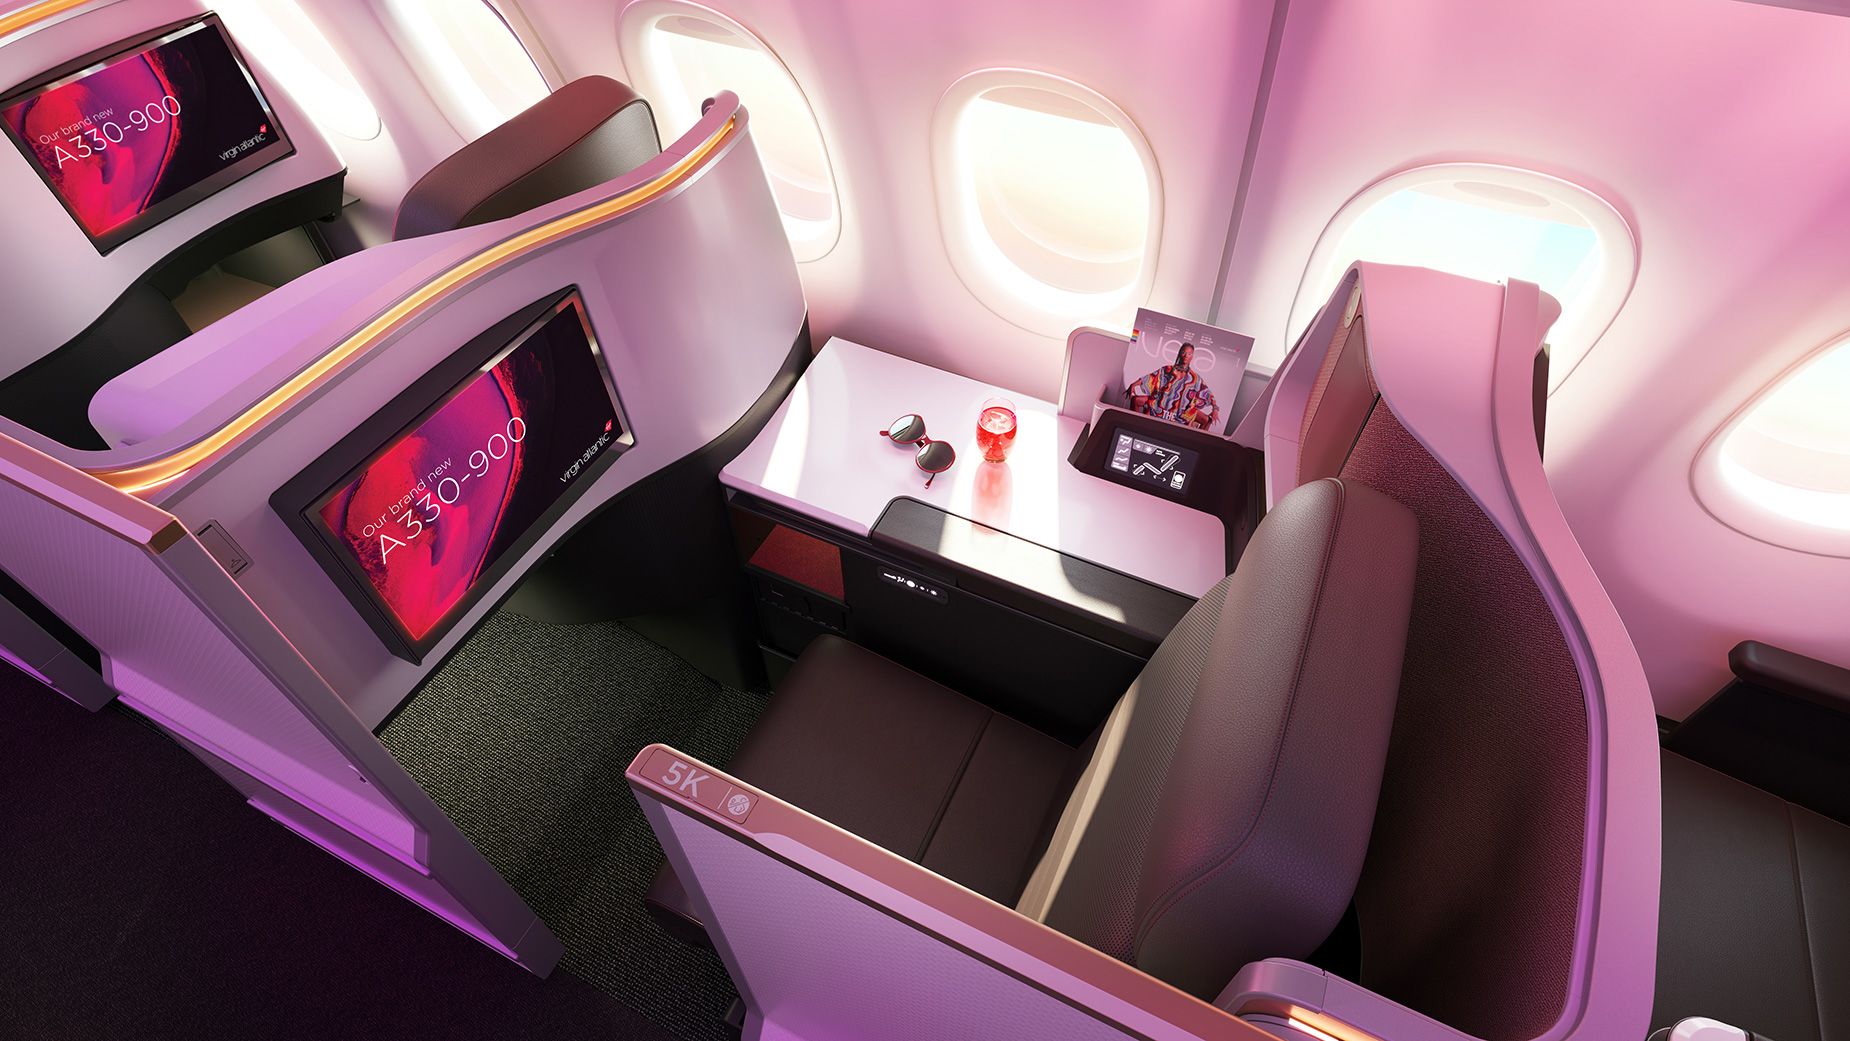 Virgin Atlantic's A330neo Upper Class cabins feature mini-suites with doors. Some designers predict that innovation in business class may soon move beyond doored suites.